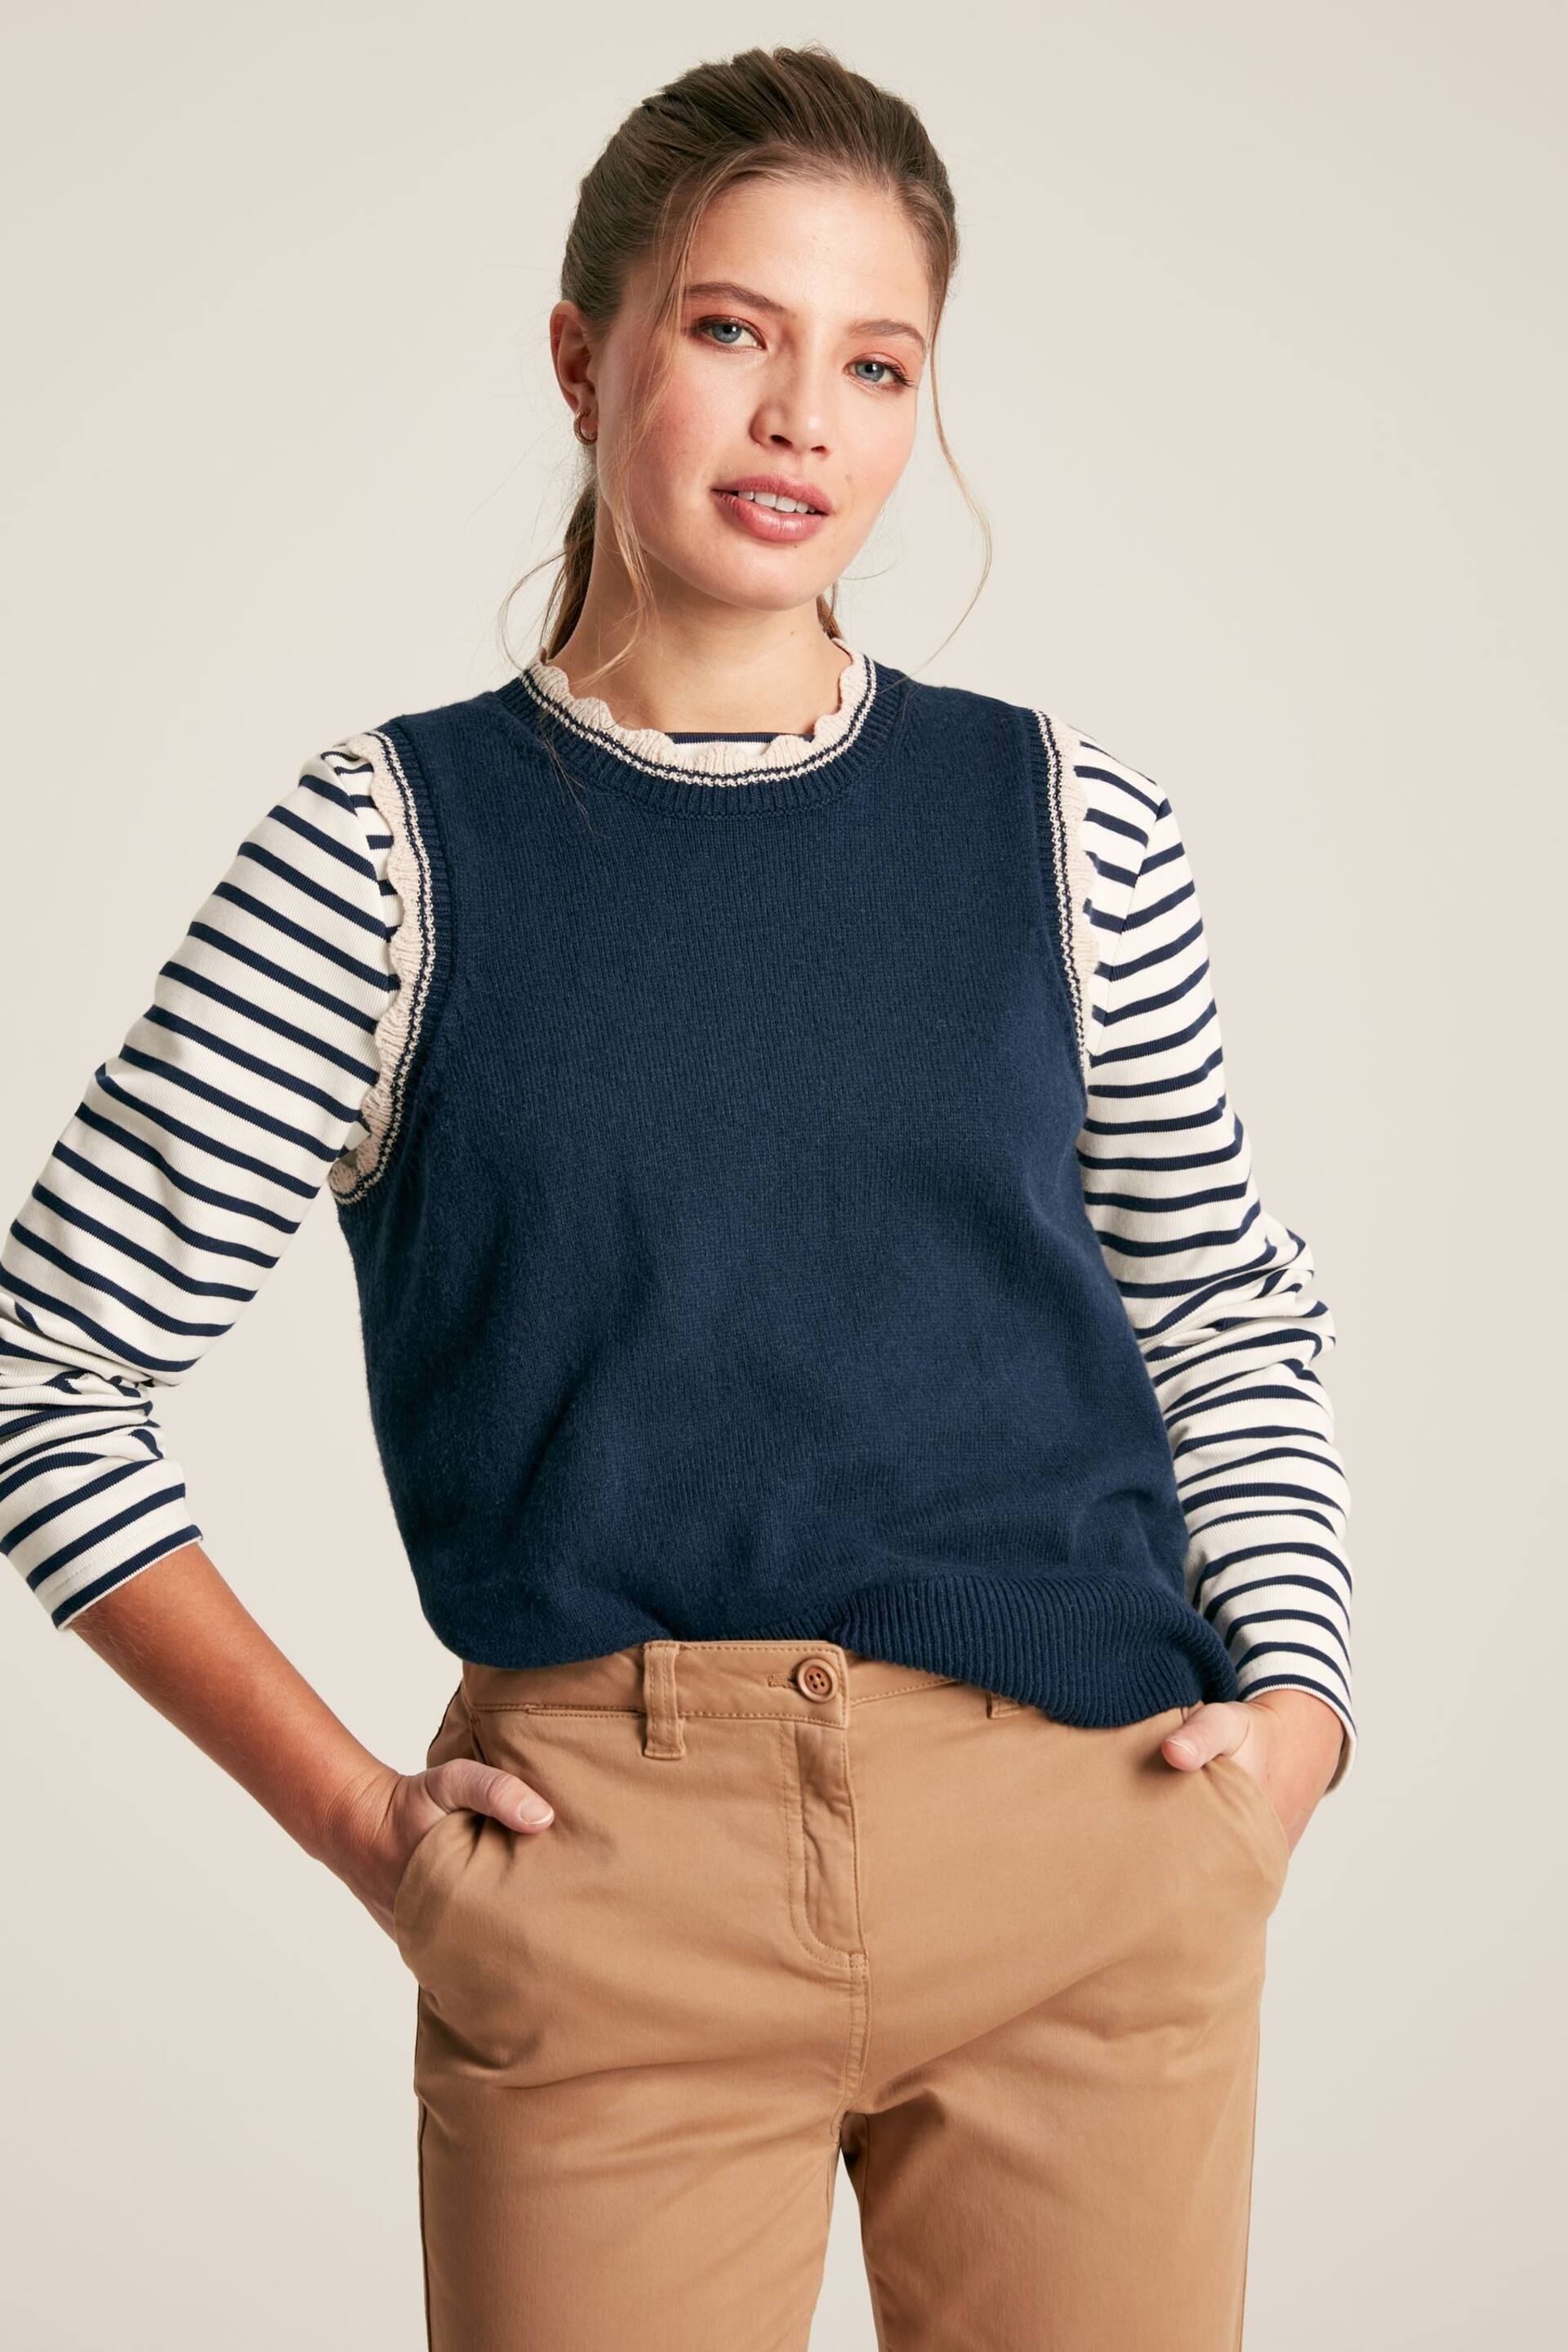 Joules Claudette Navy Knitted Tank Top - Image 1 of 7